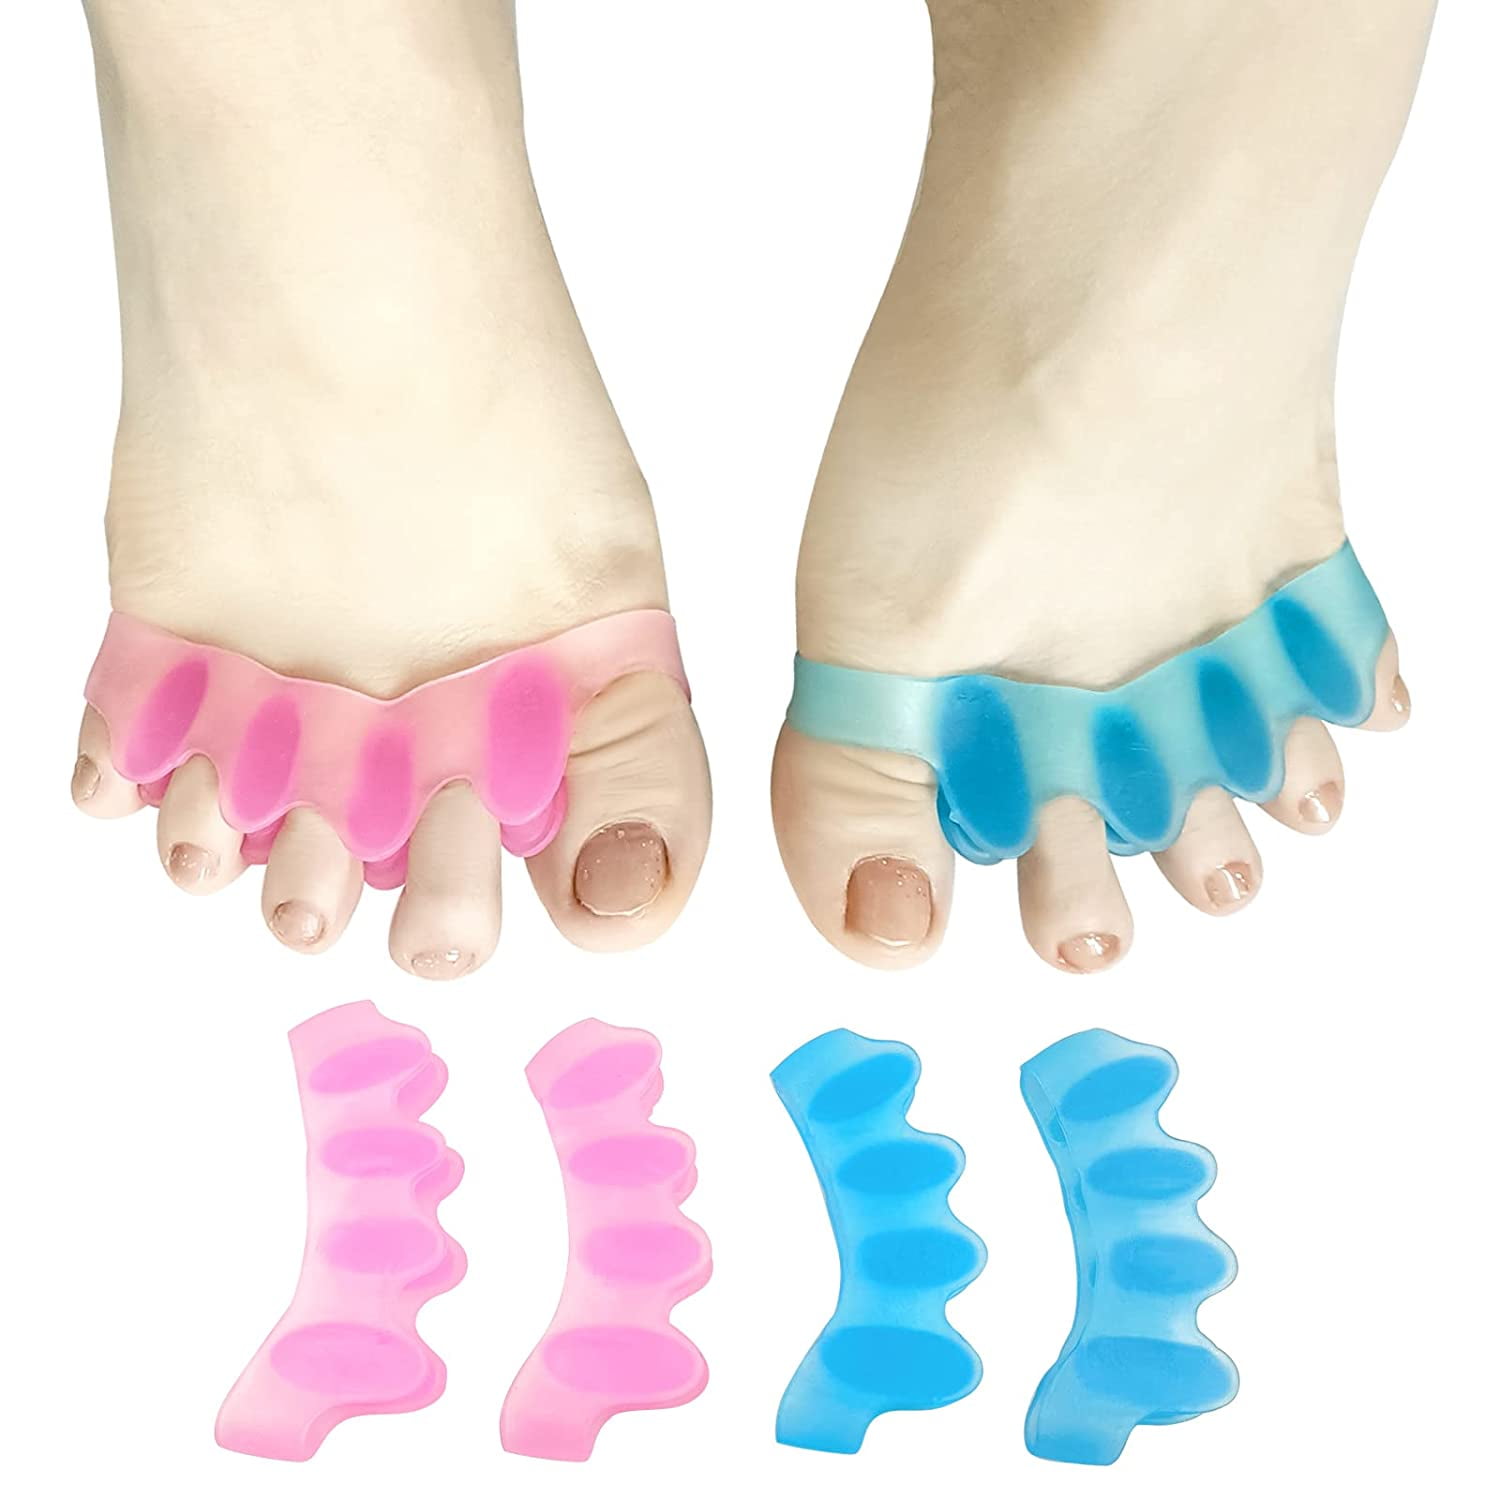 Toe Spacers for Feet Women,Toe Separators for Men,Relieves ...